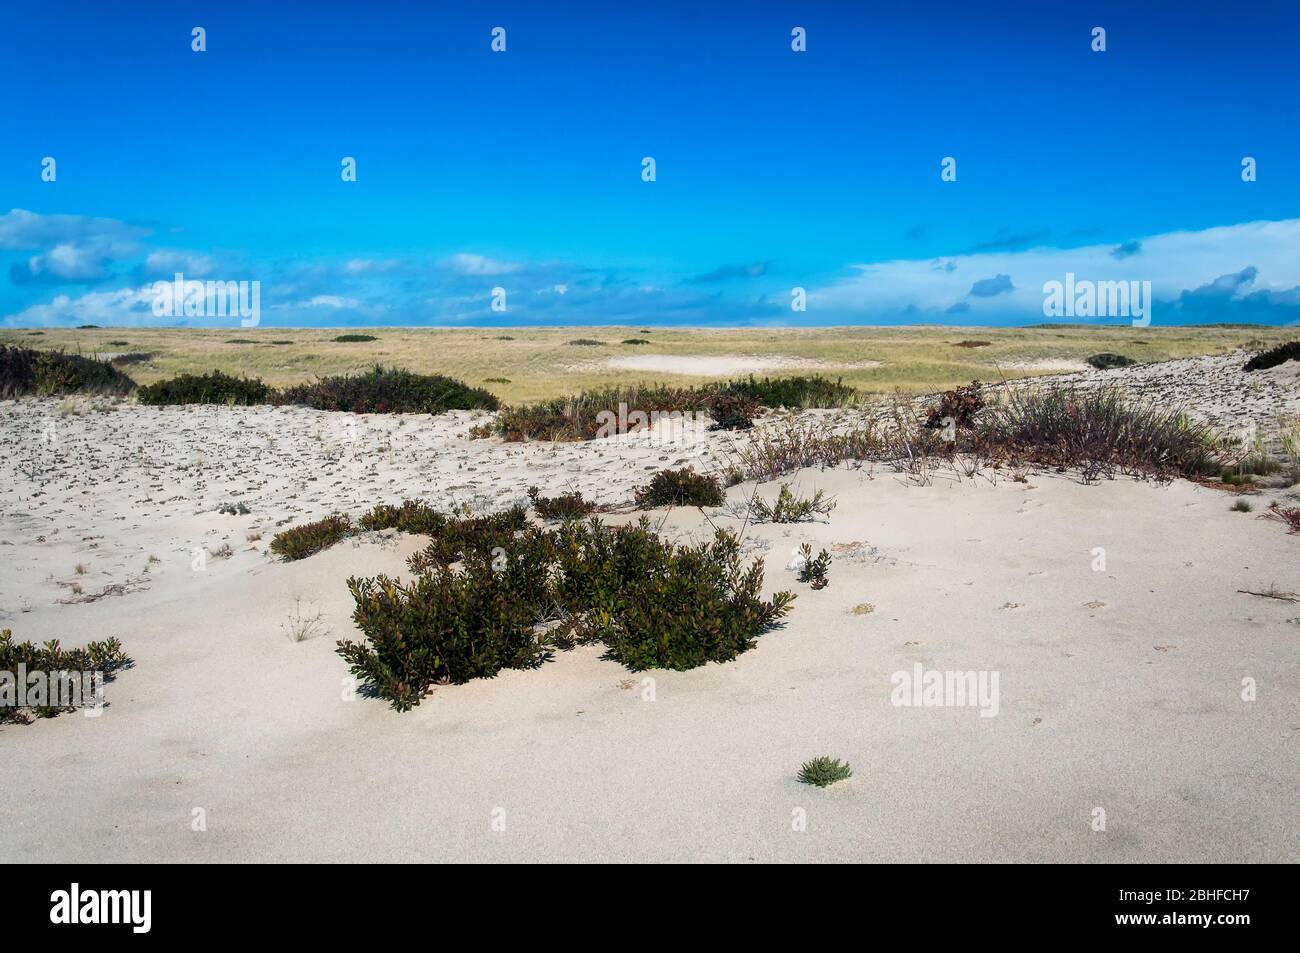 The sand dunes of national seashore located in Cape Cod Massachusetts on a sunny blue sky autumn day in New england. Stock Photo